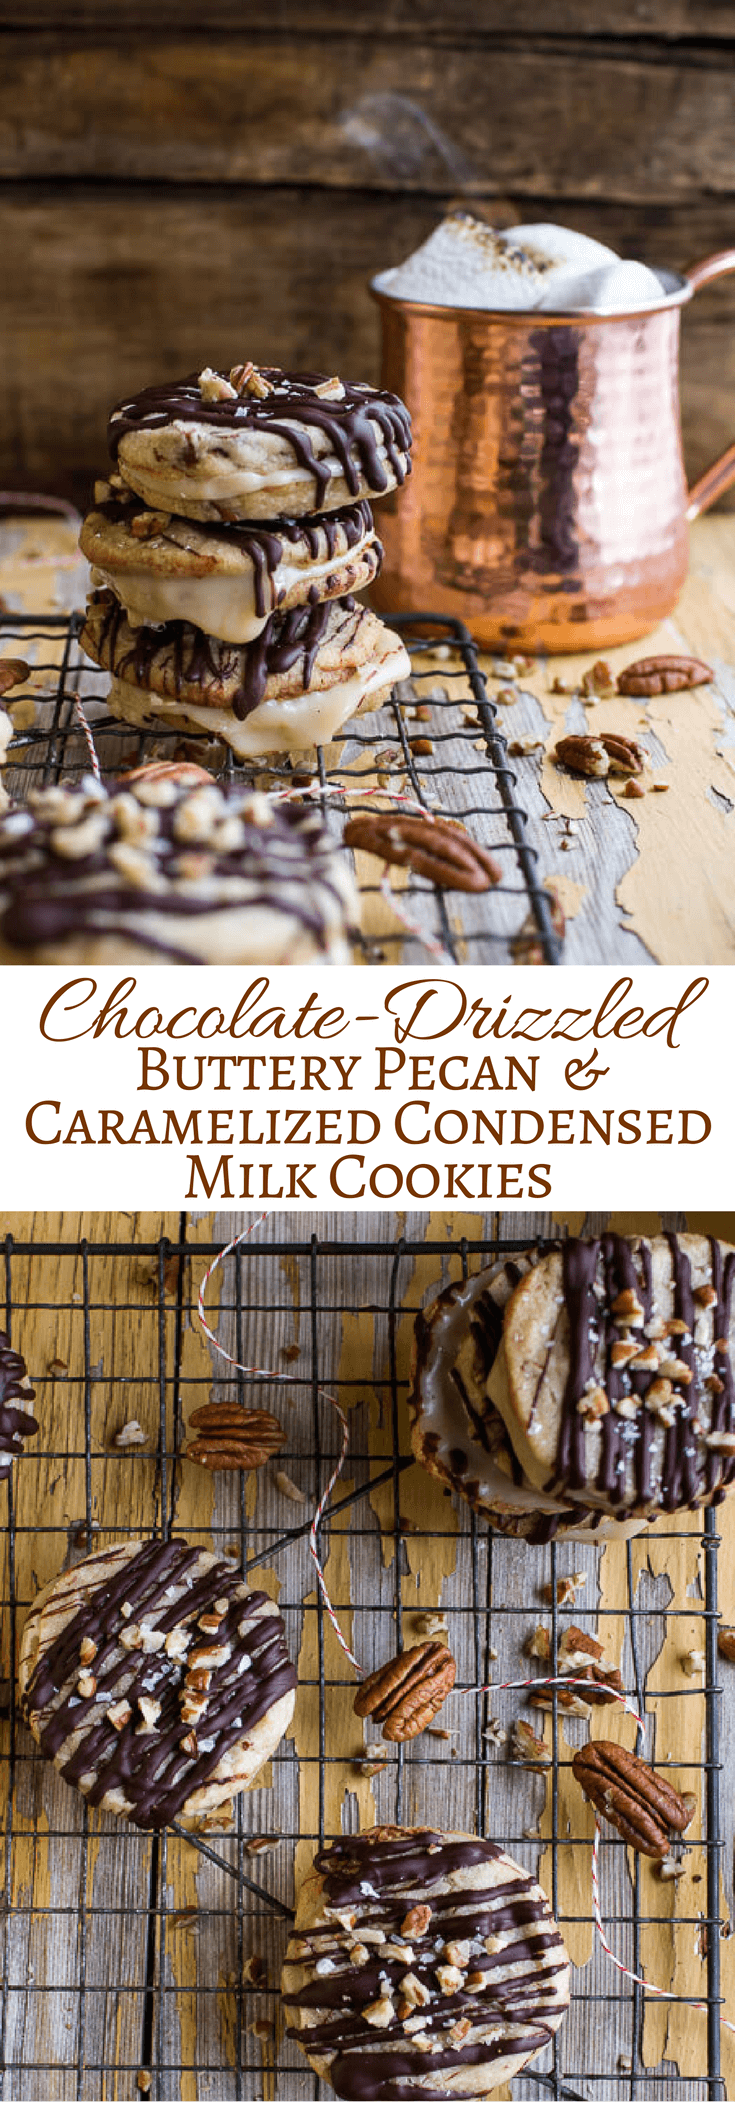 Chocolate-Drizzled Buttery Pecan and Caramelized Condensed Milk Cookies | halfbakedharvest.com @hbharvest